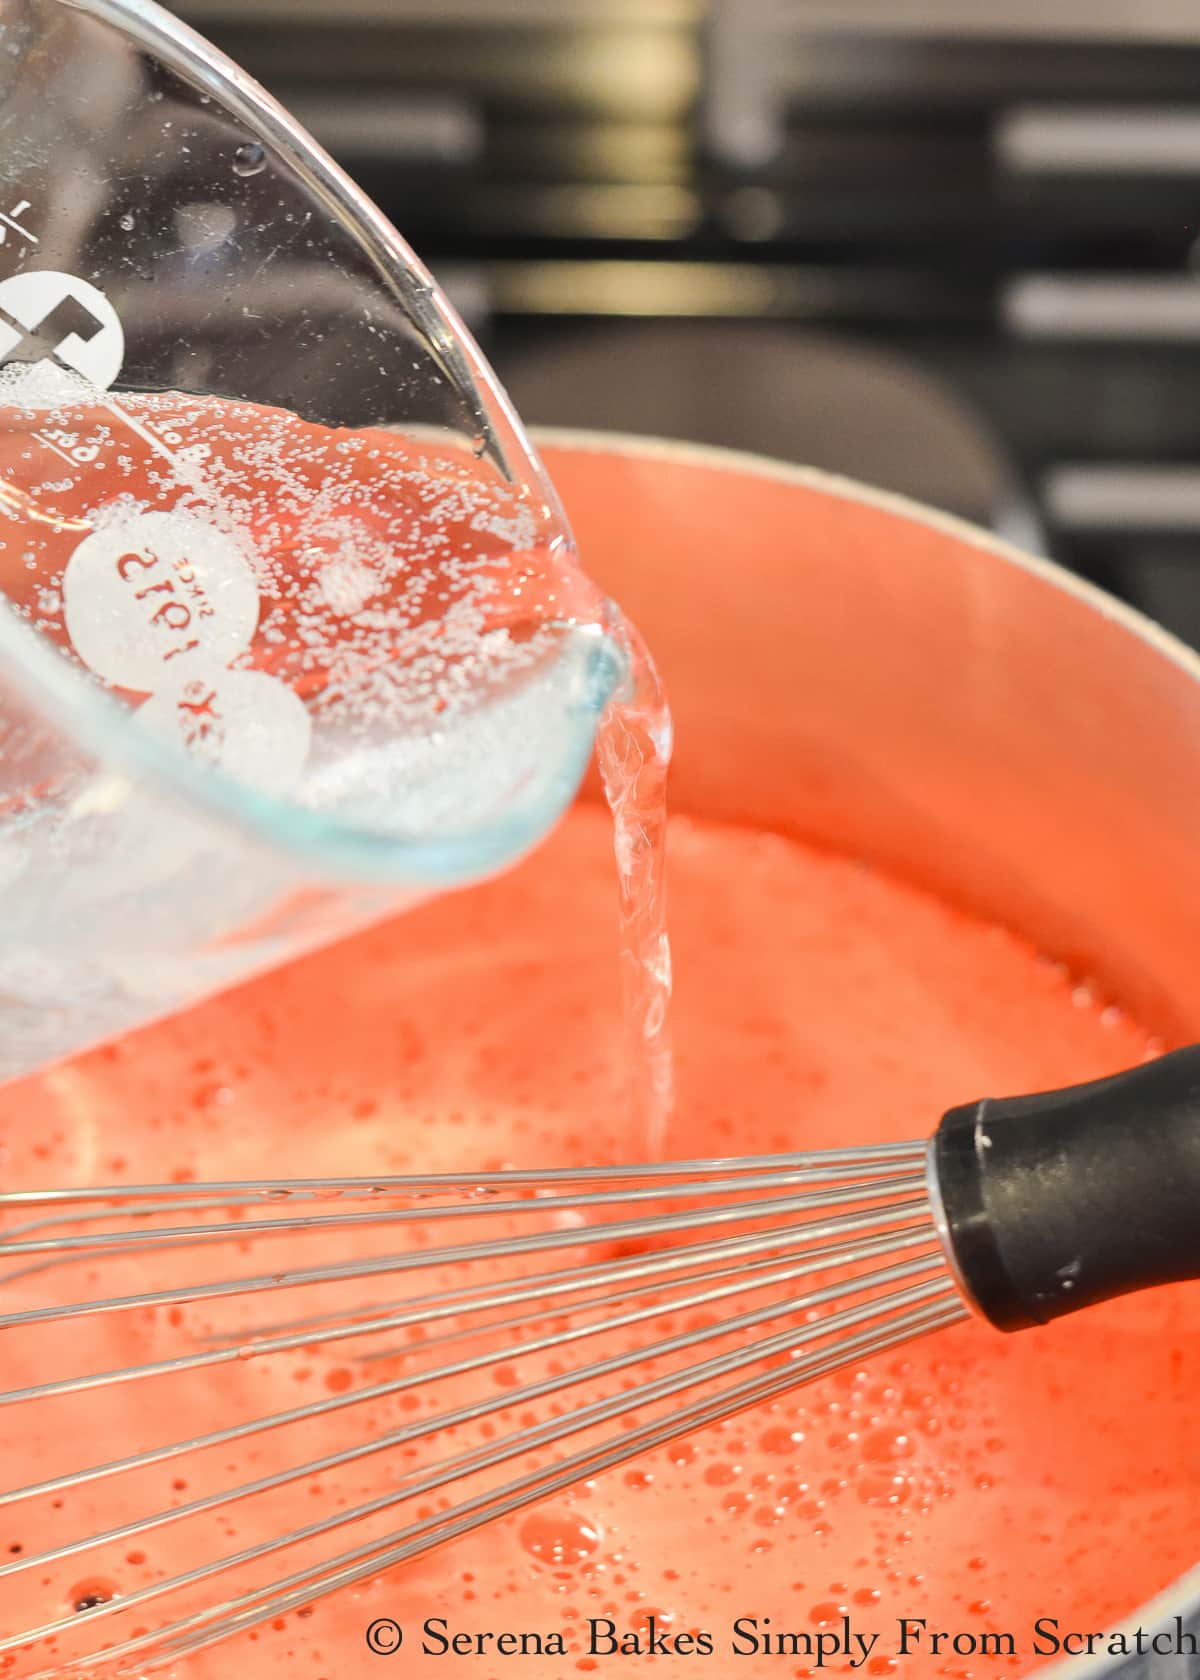 7 Up in a measuring glass being poured into Raspberry Jello mixture in a stainless steel pot.